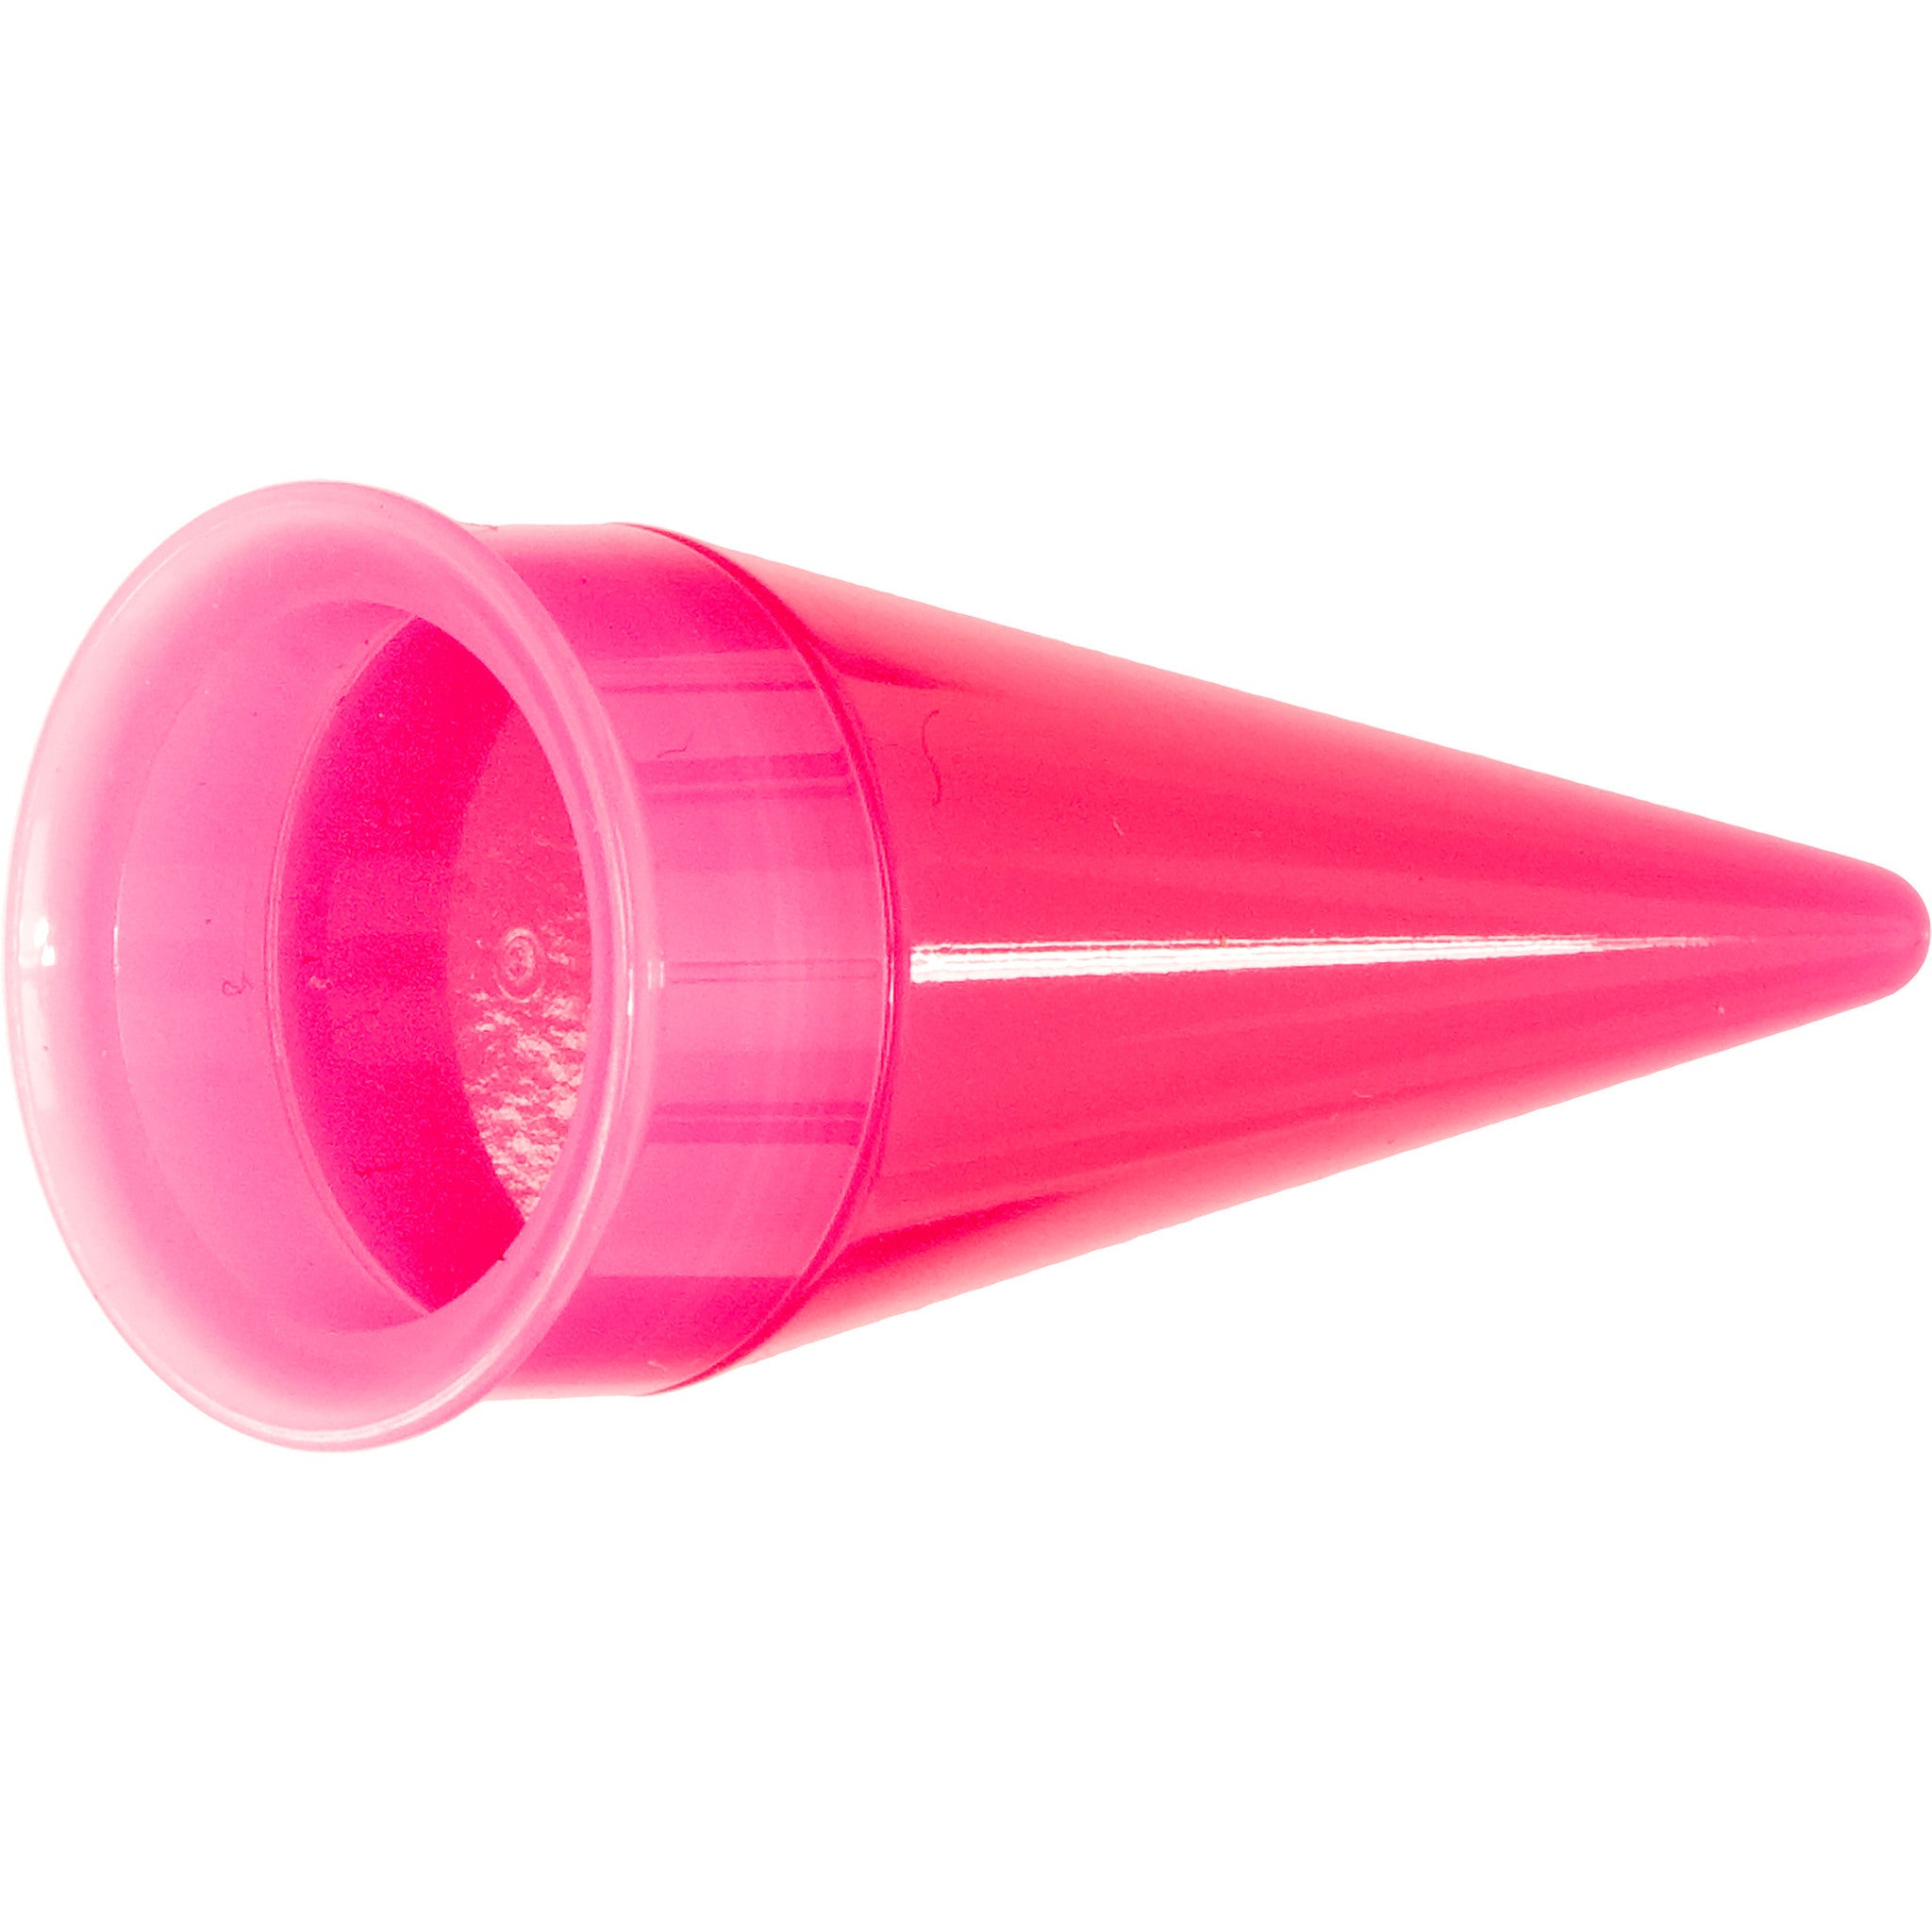 20mm Pink 2-in1 Acrylic Screw Fit Interchangeable Plug Tunnel